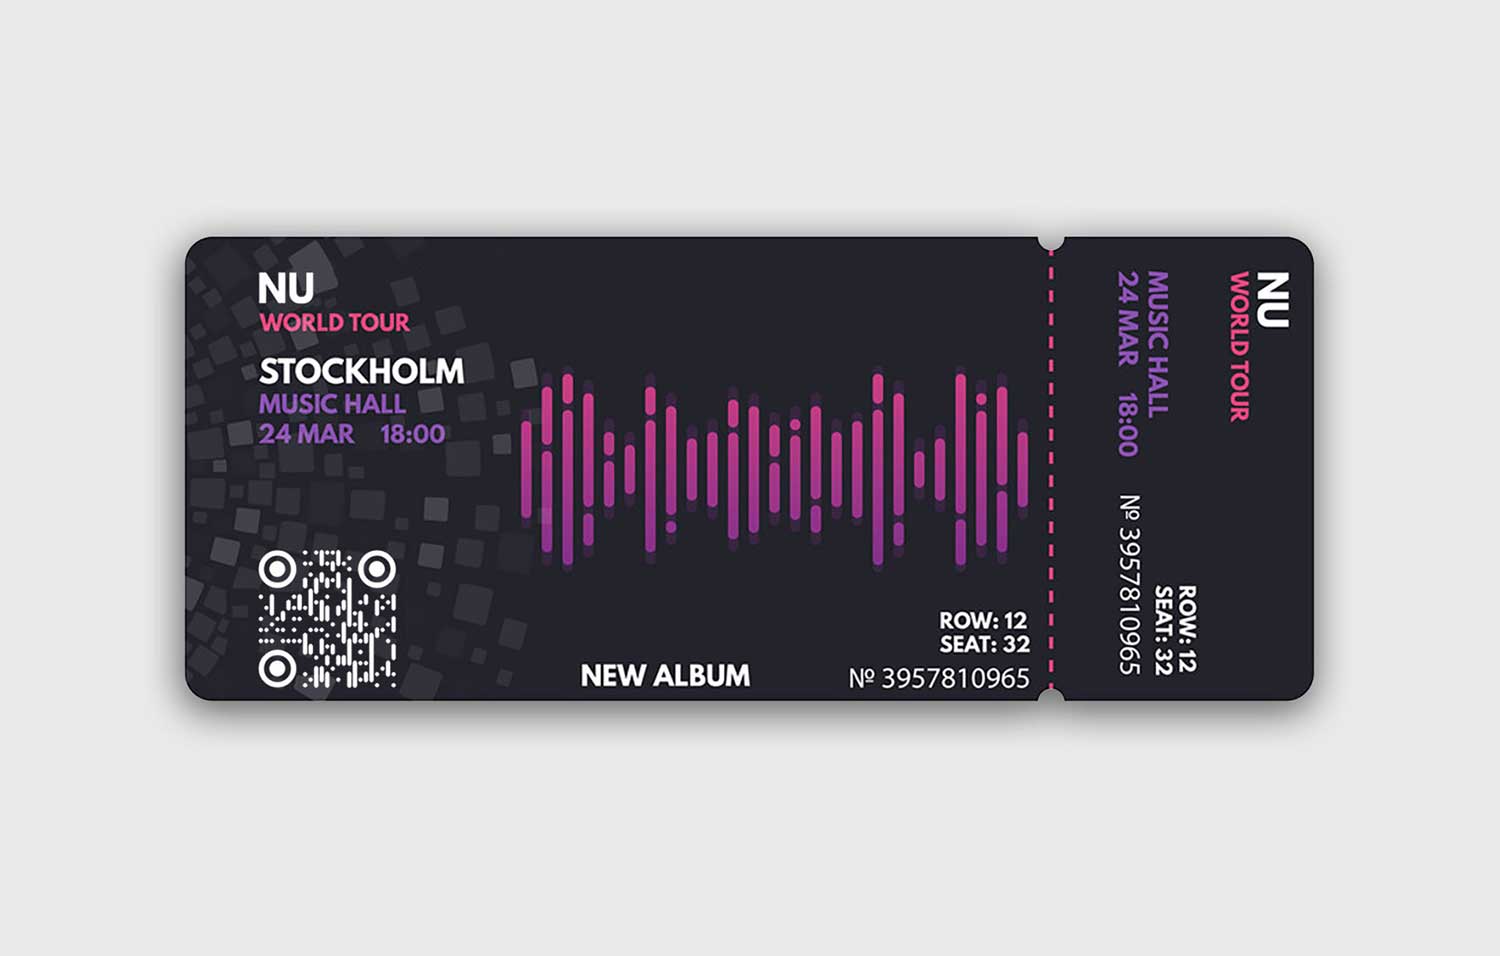 How To Use Qr Codes On Tickets Festival Passes